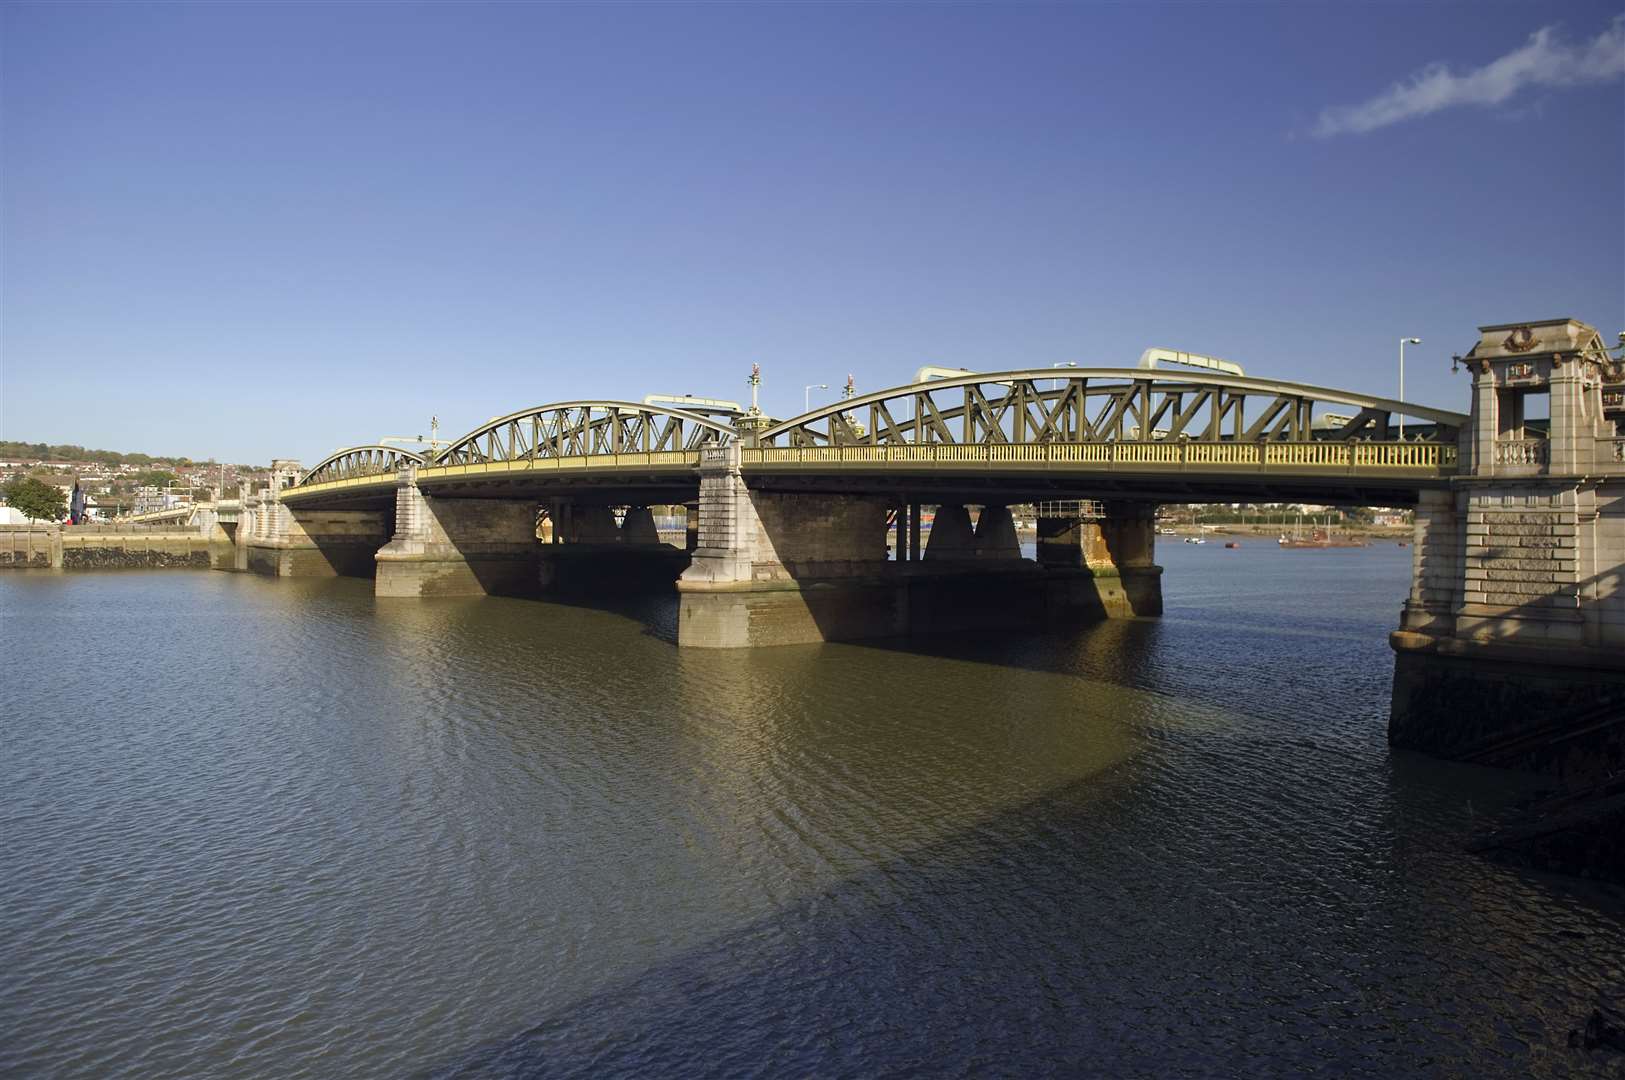 Rochester Bridge Trust is funding the restoration of the crossing